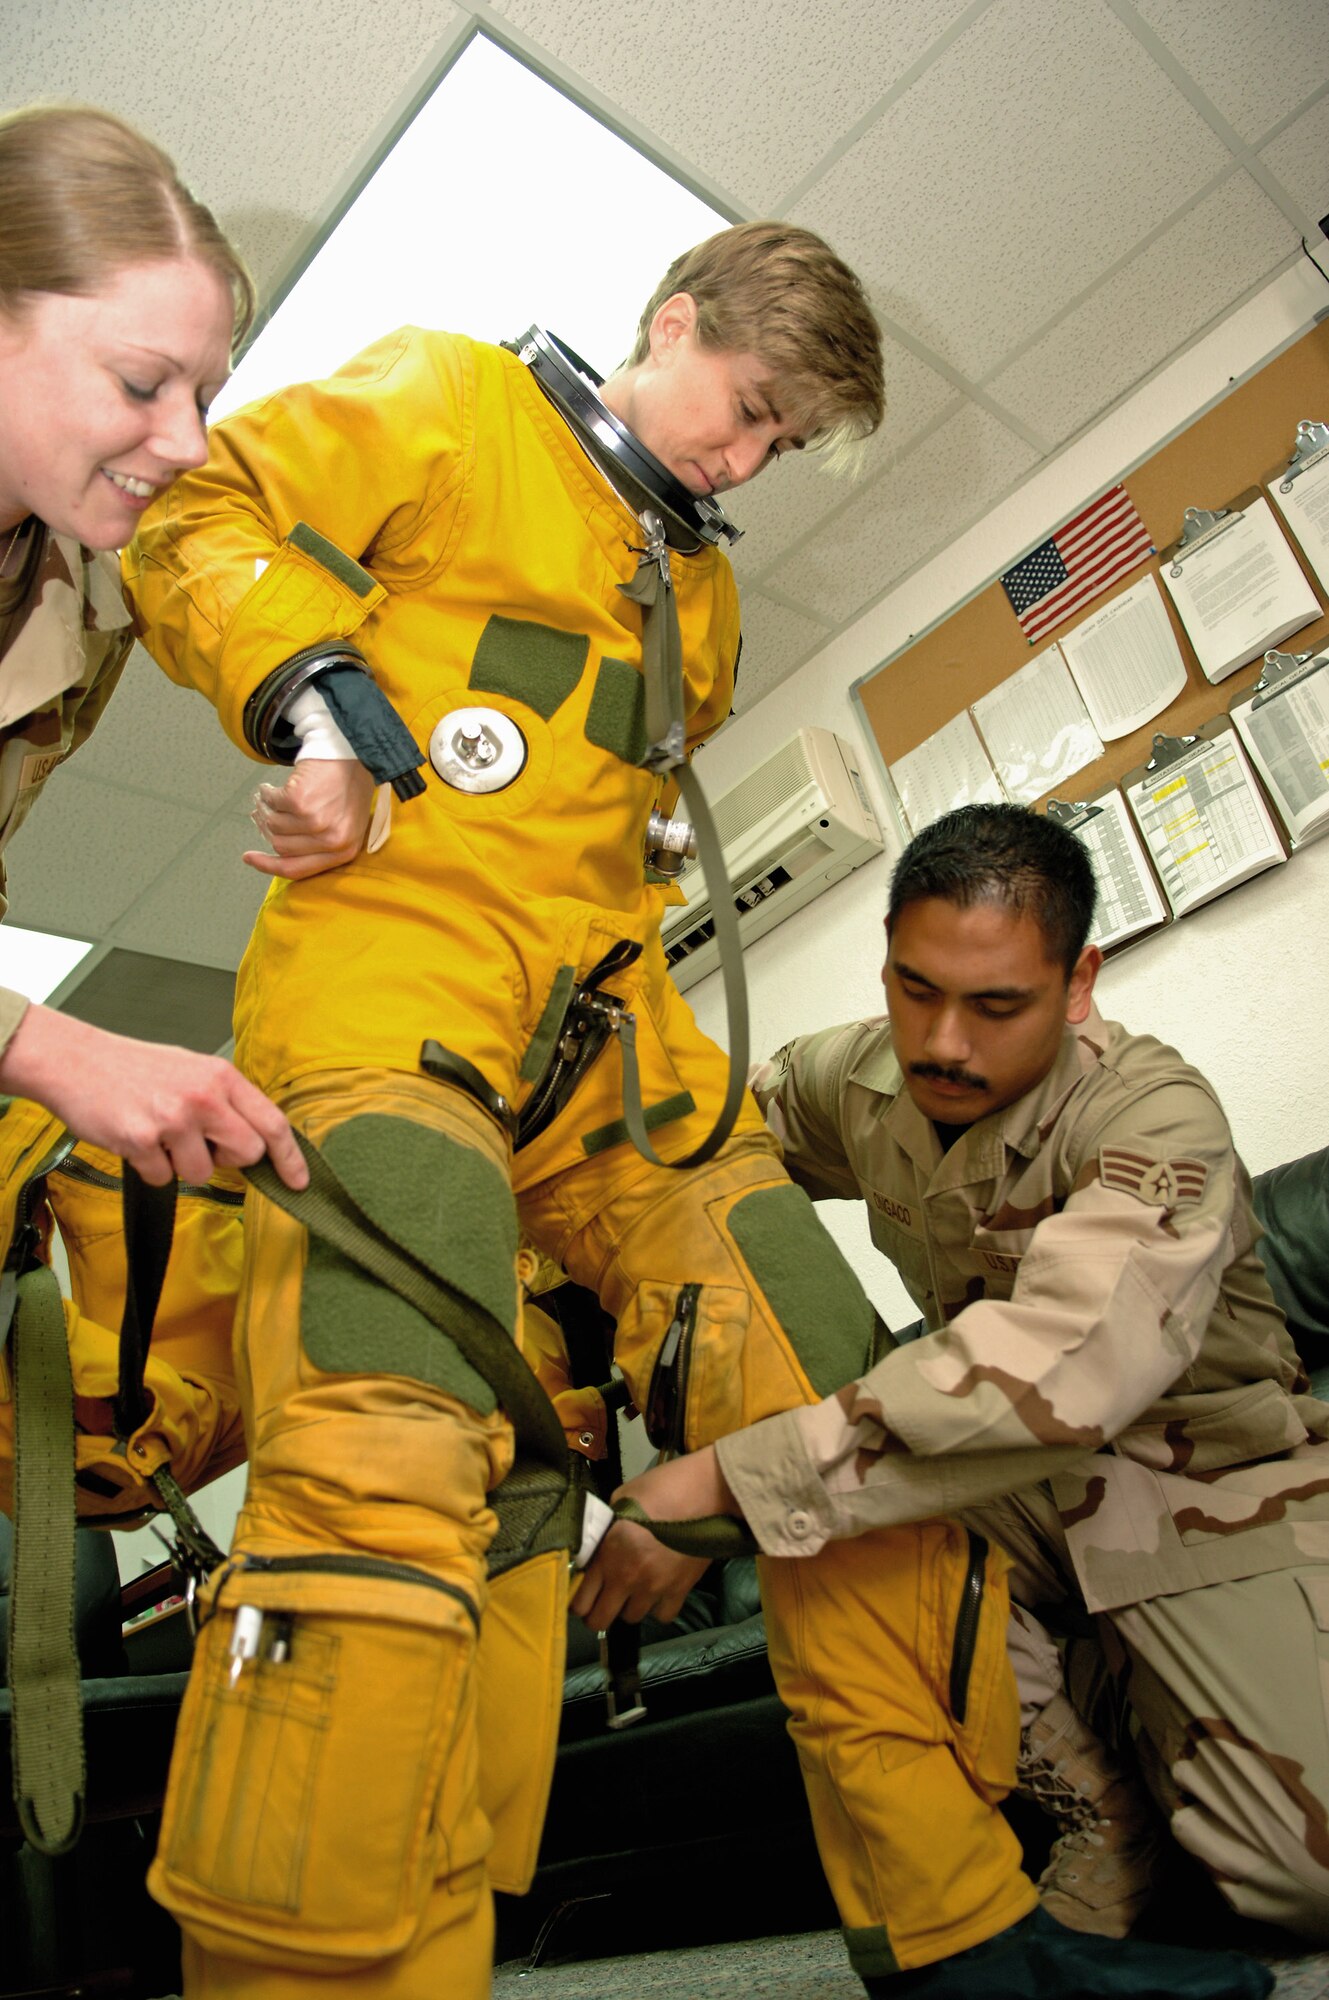 Capt. Heather Fox, a U-2 Dragon Lady pilot with the 99th Expeditionary Reconnaissance Squadron, stands while Senior Airman Roric Ongaco (right) and Staff Sgt. Lisa Tetrick, 99th ERS physiological support division technicians, help attach the torso harness to her suit.  She was preparing to fly a reconnaissance mission March 25 from an air base in Southwest Asia.  Captain Fox is one of only three female U-2 pilots currently serving in the Air Force.  (U.S. Air Force photo/Senior Airman Levi Riendeau) 